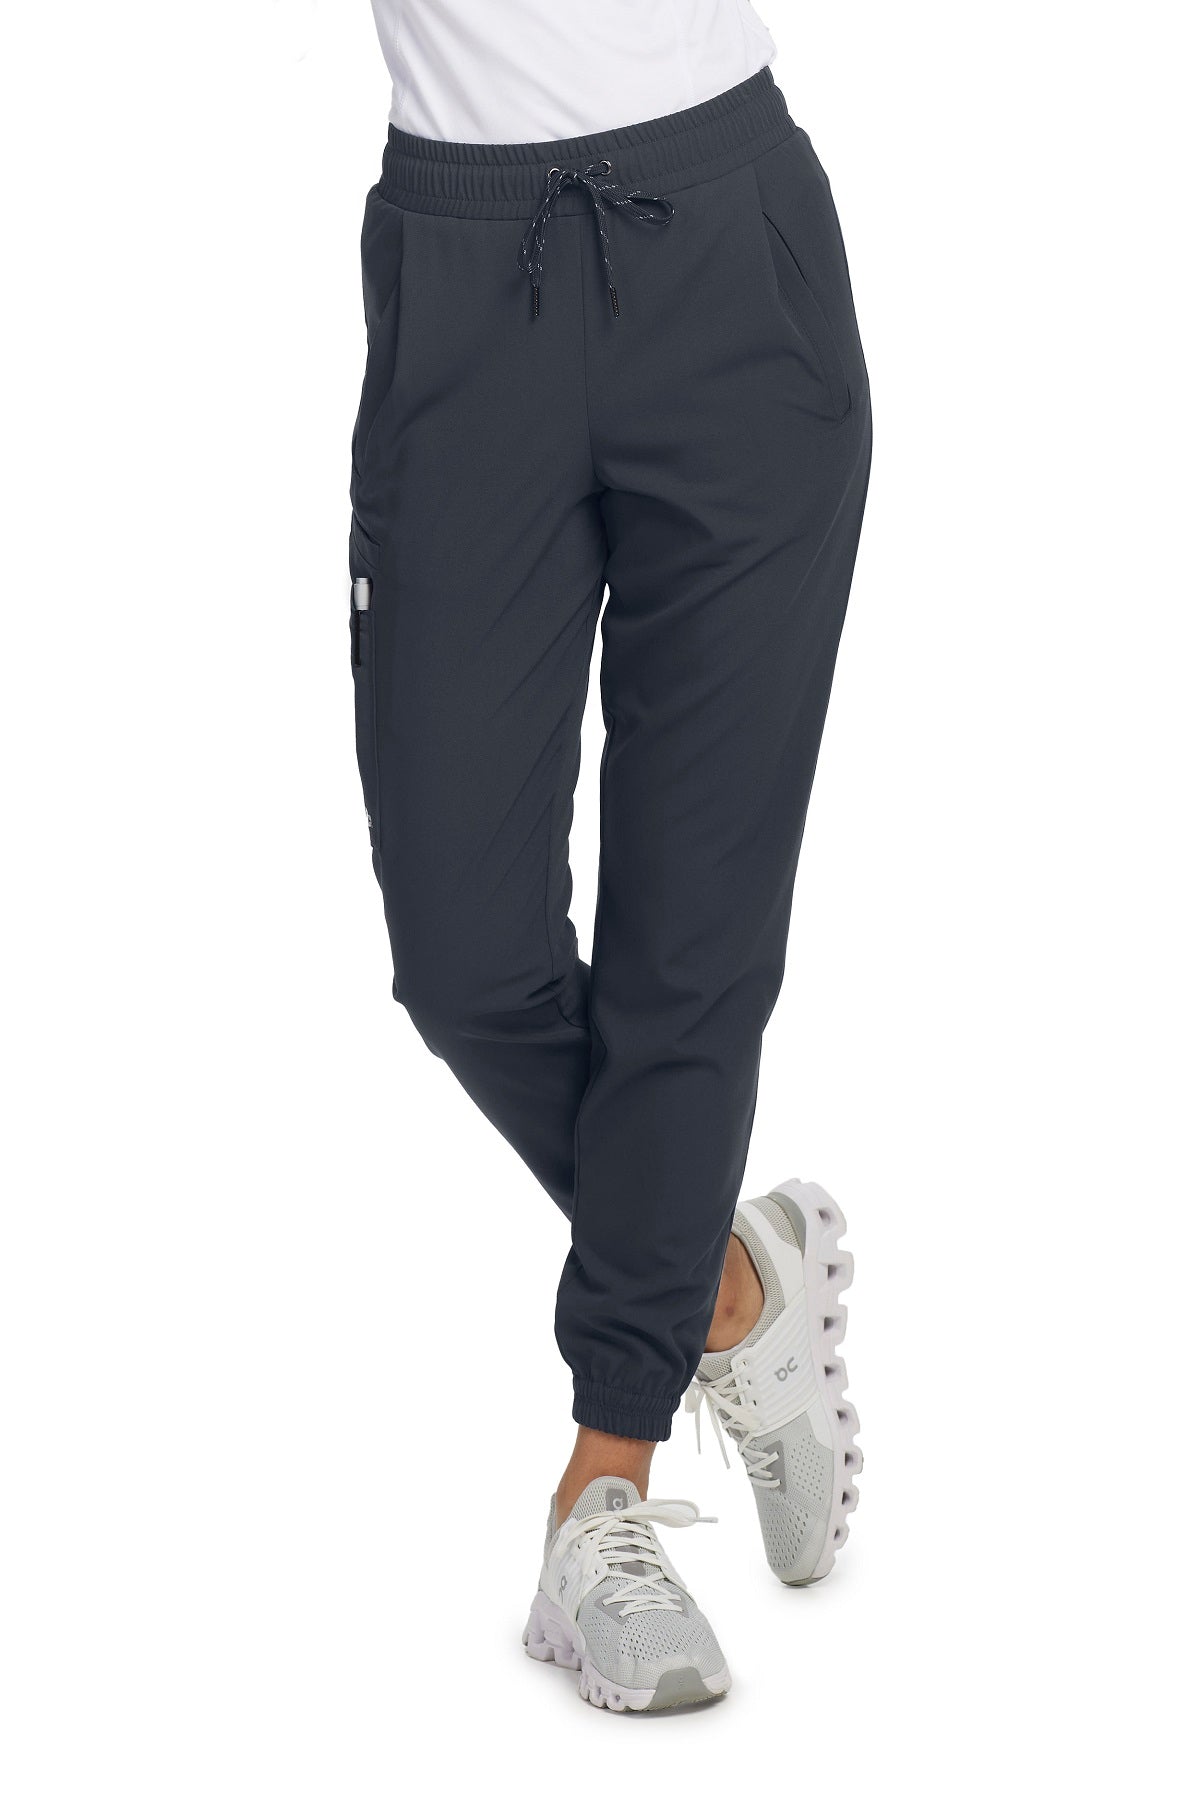 Barco Unify Scrub Pants Mission Jogger Regular Length in Steel at Parker's Clothing and Shoes.